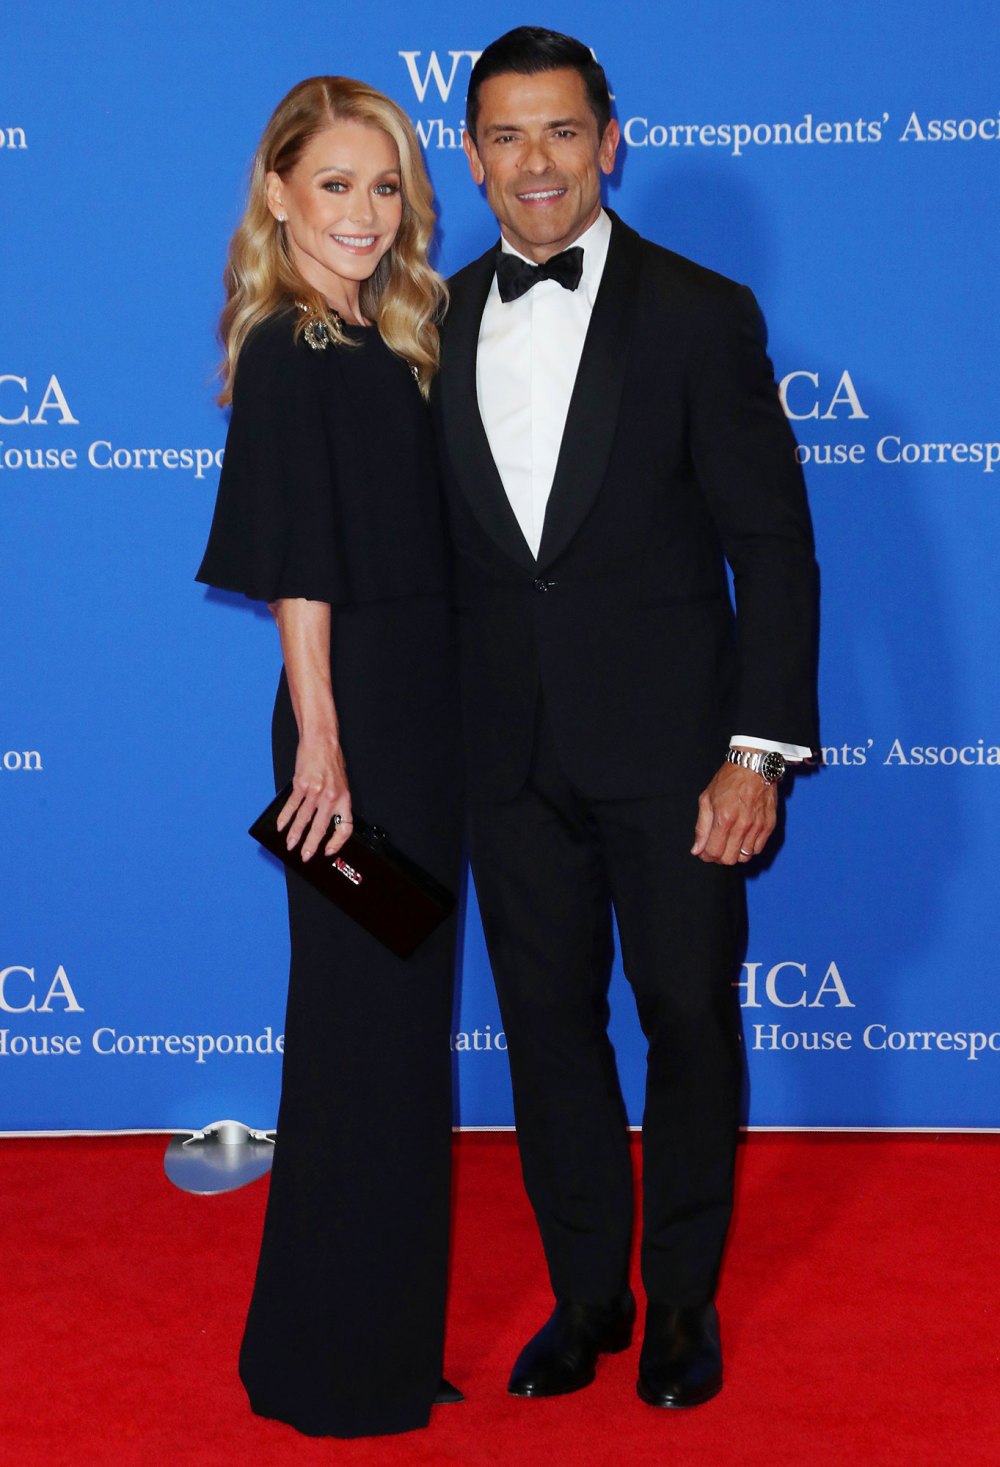 Kelly Ripa and Mark Consuelos Not Interested in Renewing Their Vows